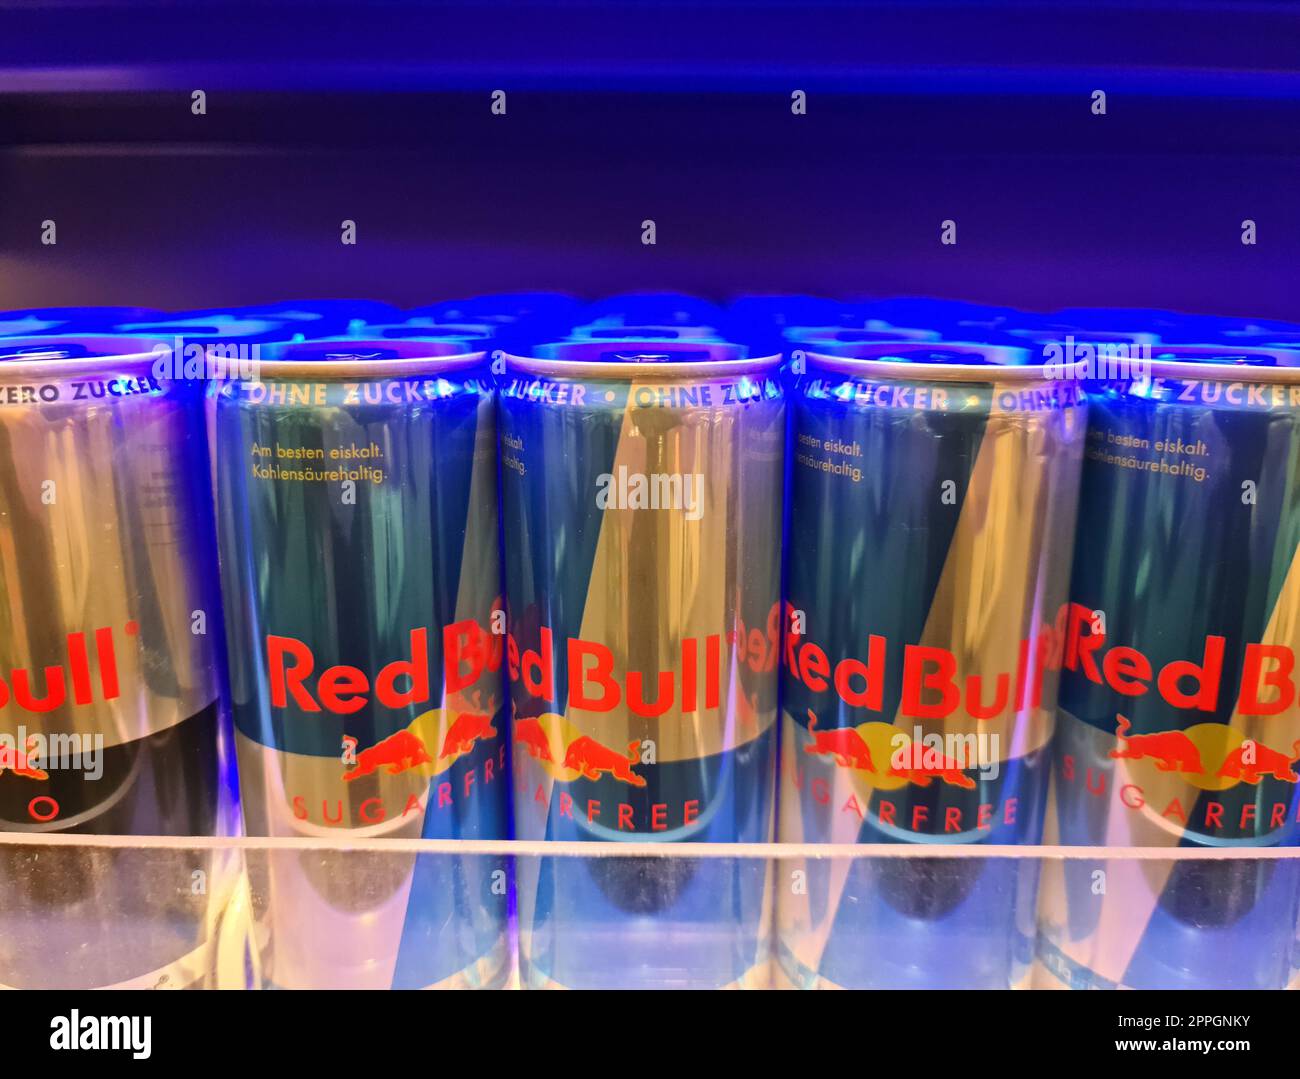 Hamburg, Germany - 03 September 2022: Red Bull brand energy drink cans under blue light in a supermarket Stock Photo